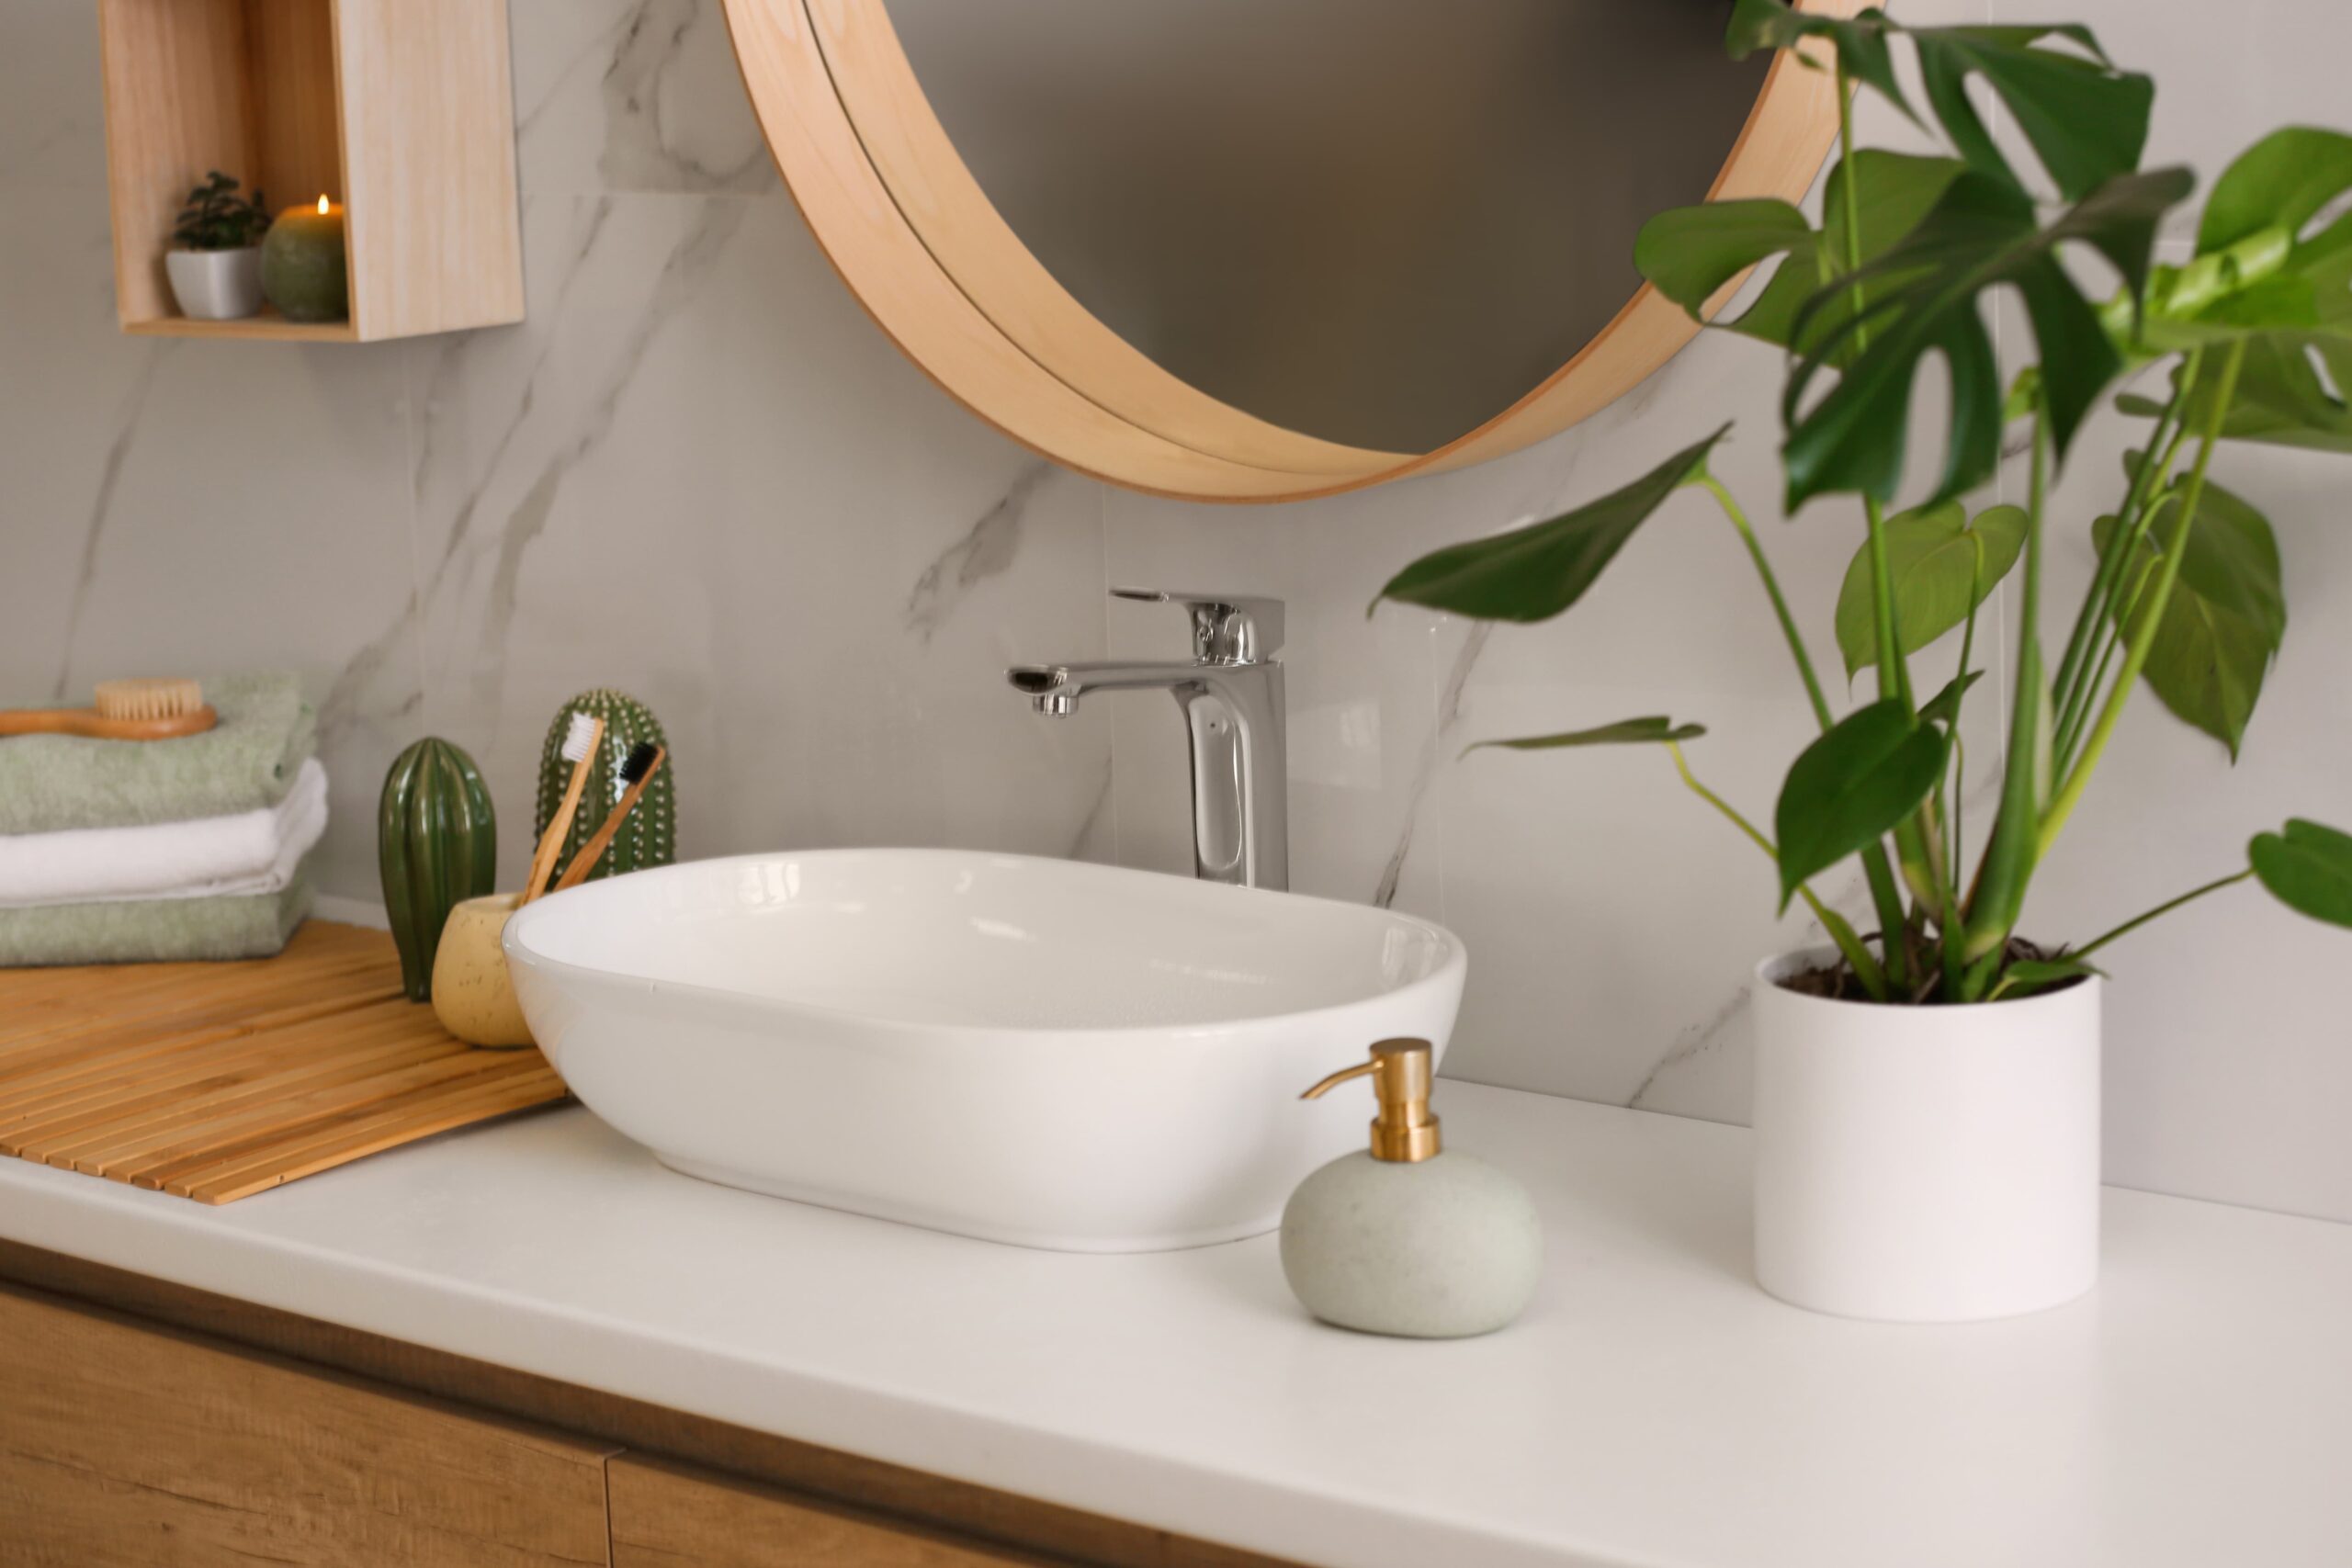 10 Top Tricks to Make a Small Bathroom Look Larger